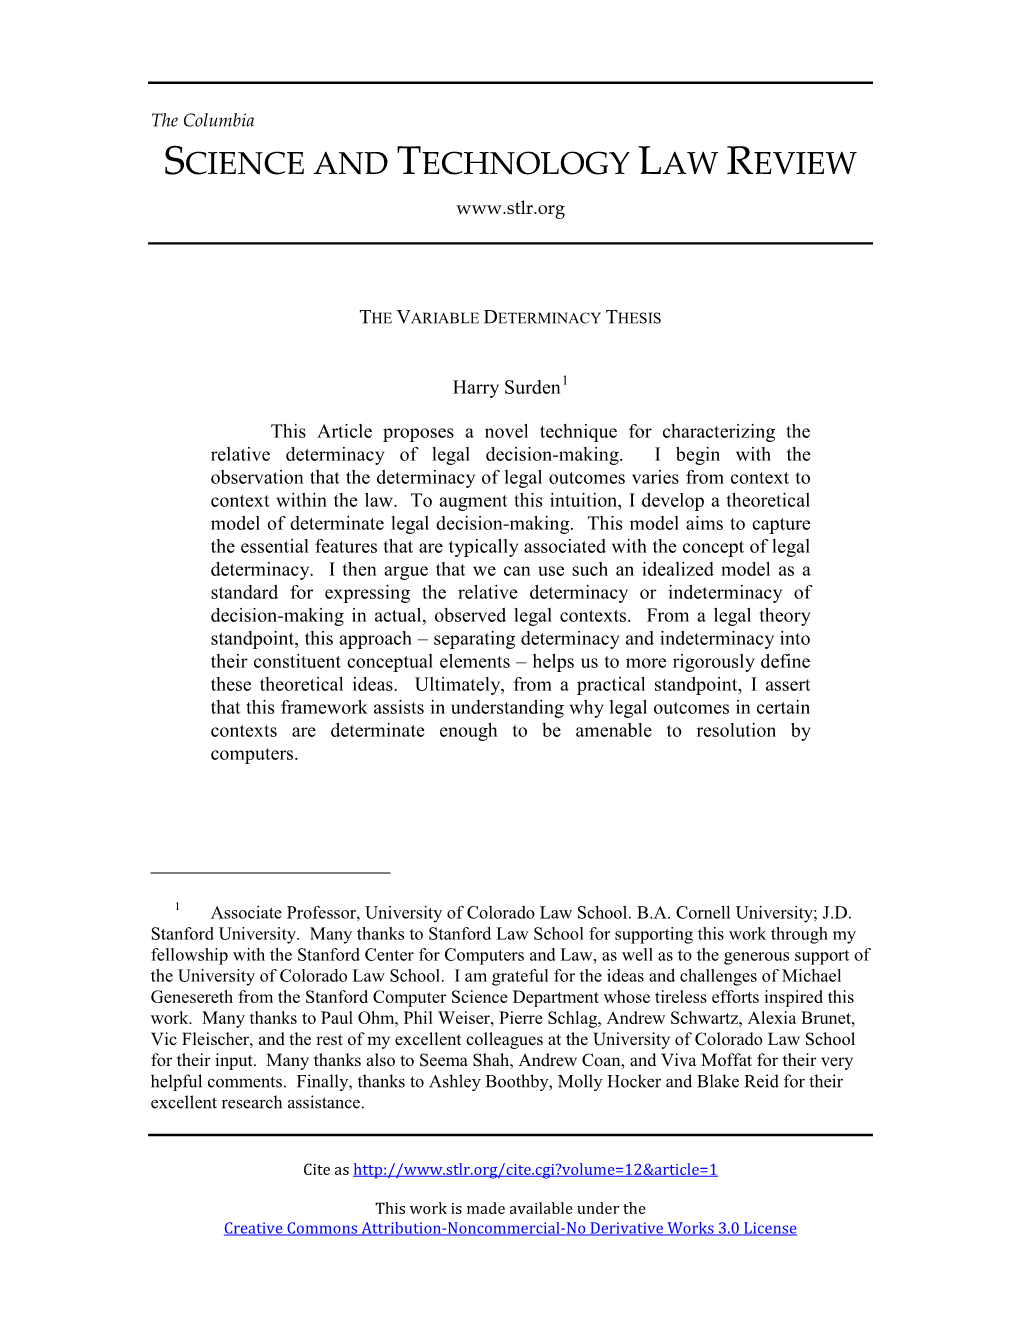 Science and Technology Law Review